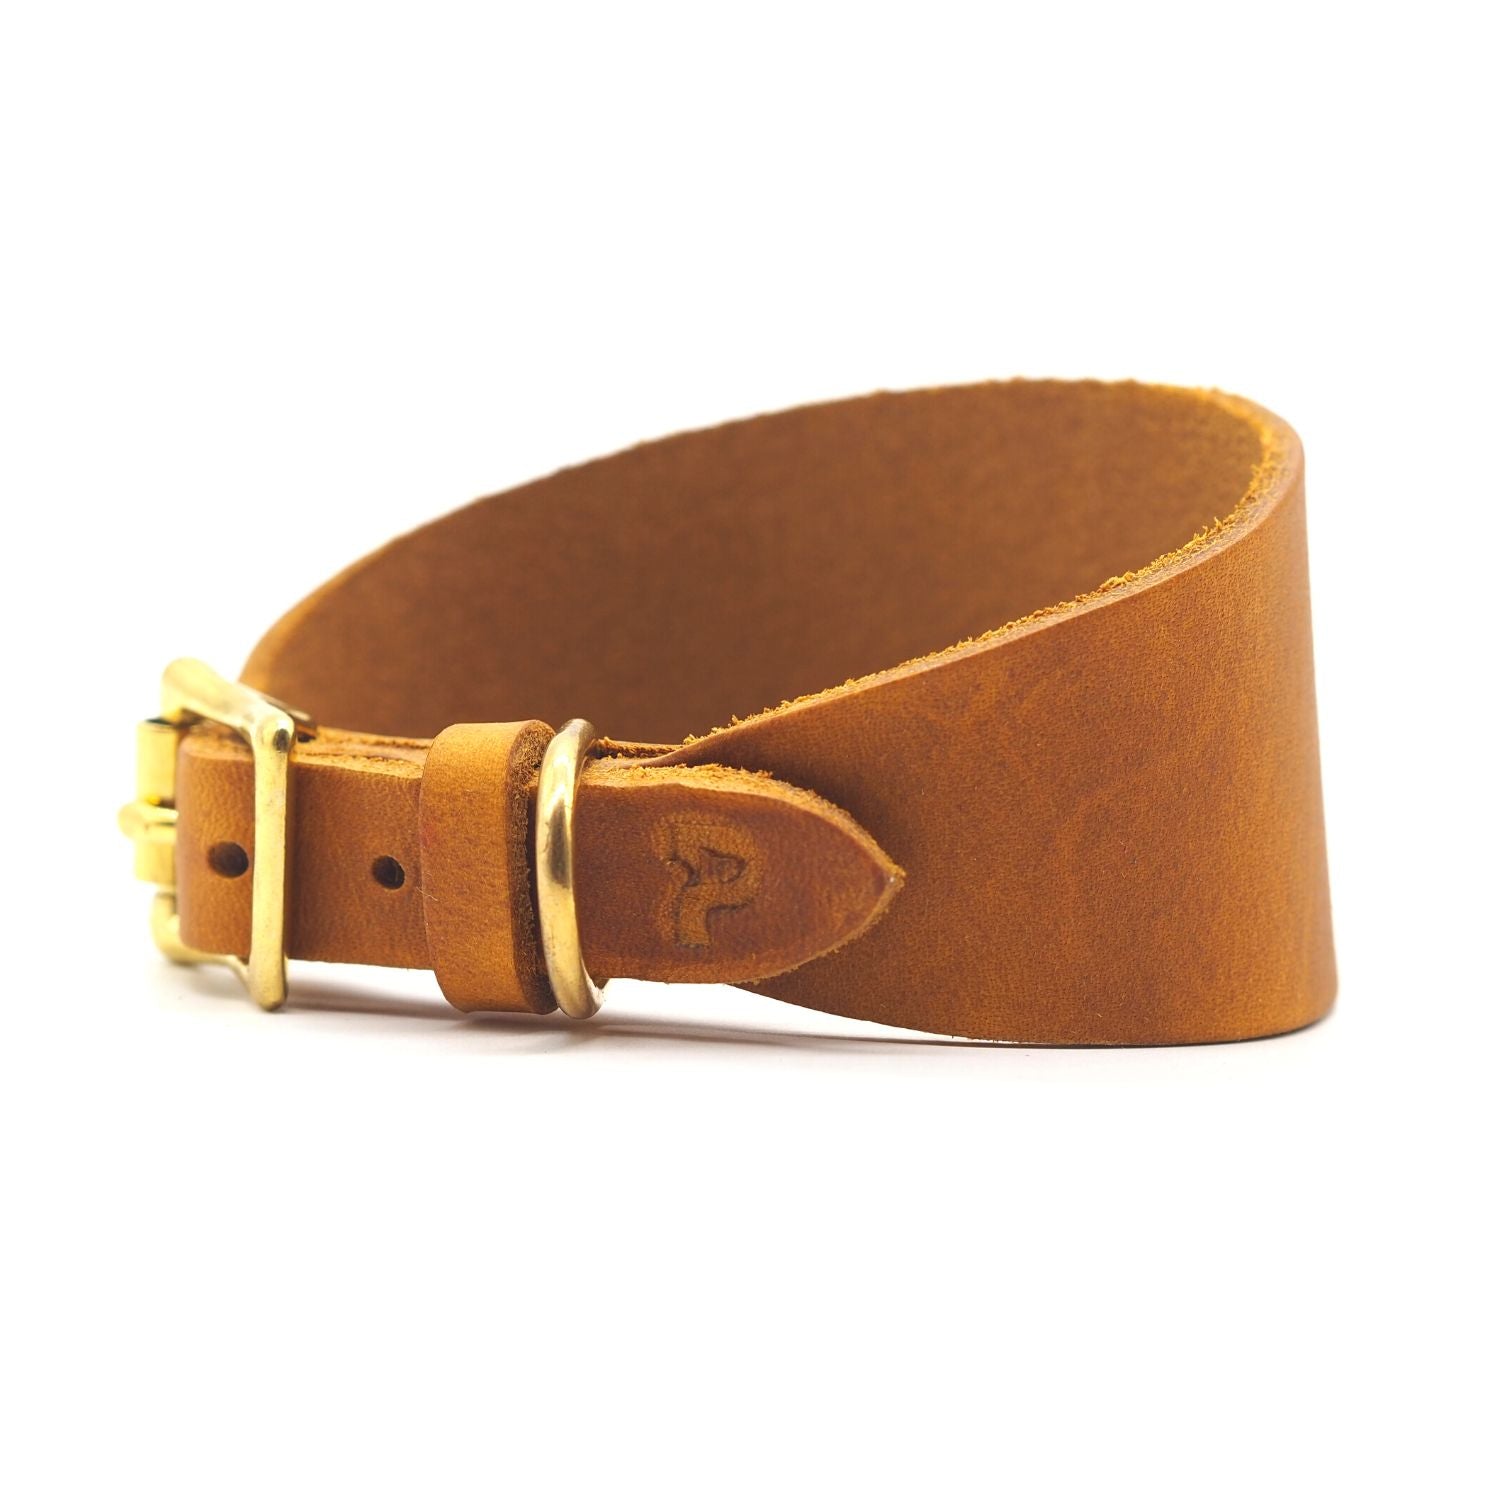 Greyhound collar made of greased leather (5 cm wide)